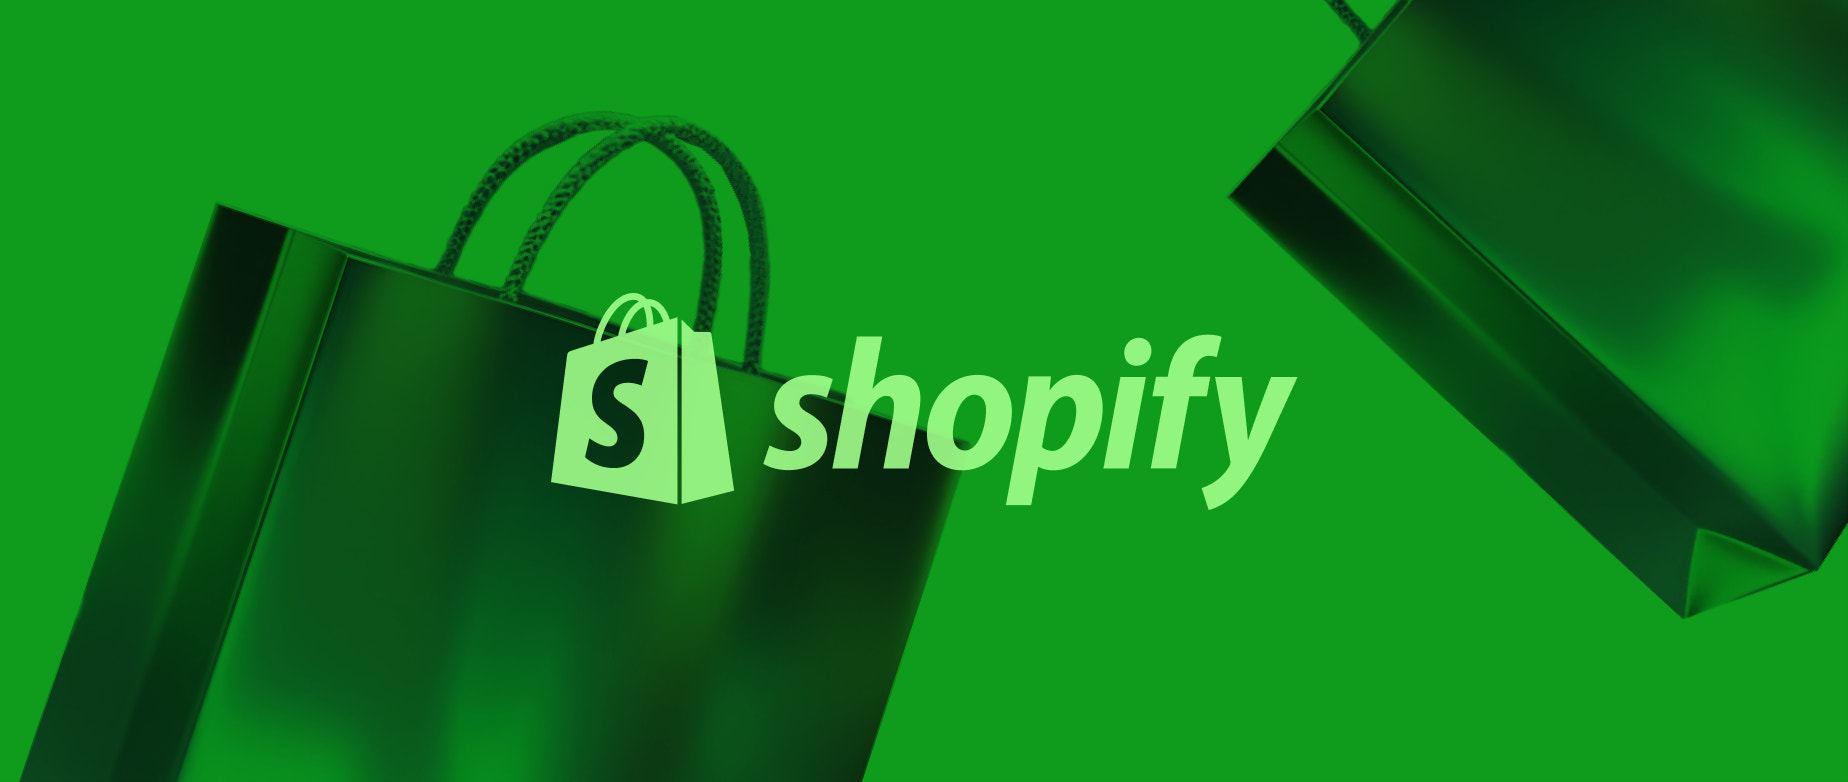 Top Successful Shopify Businesses - What Sets Them Apart?